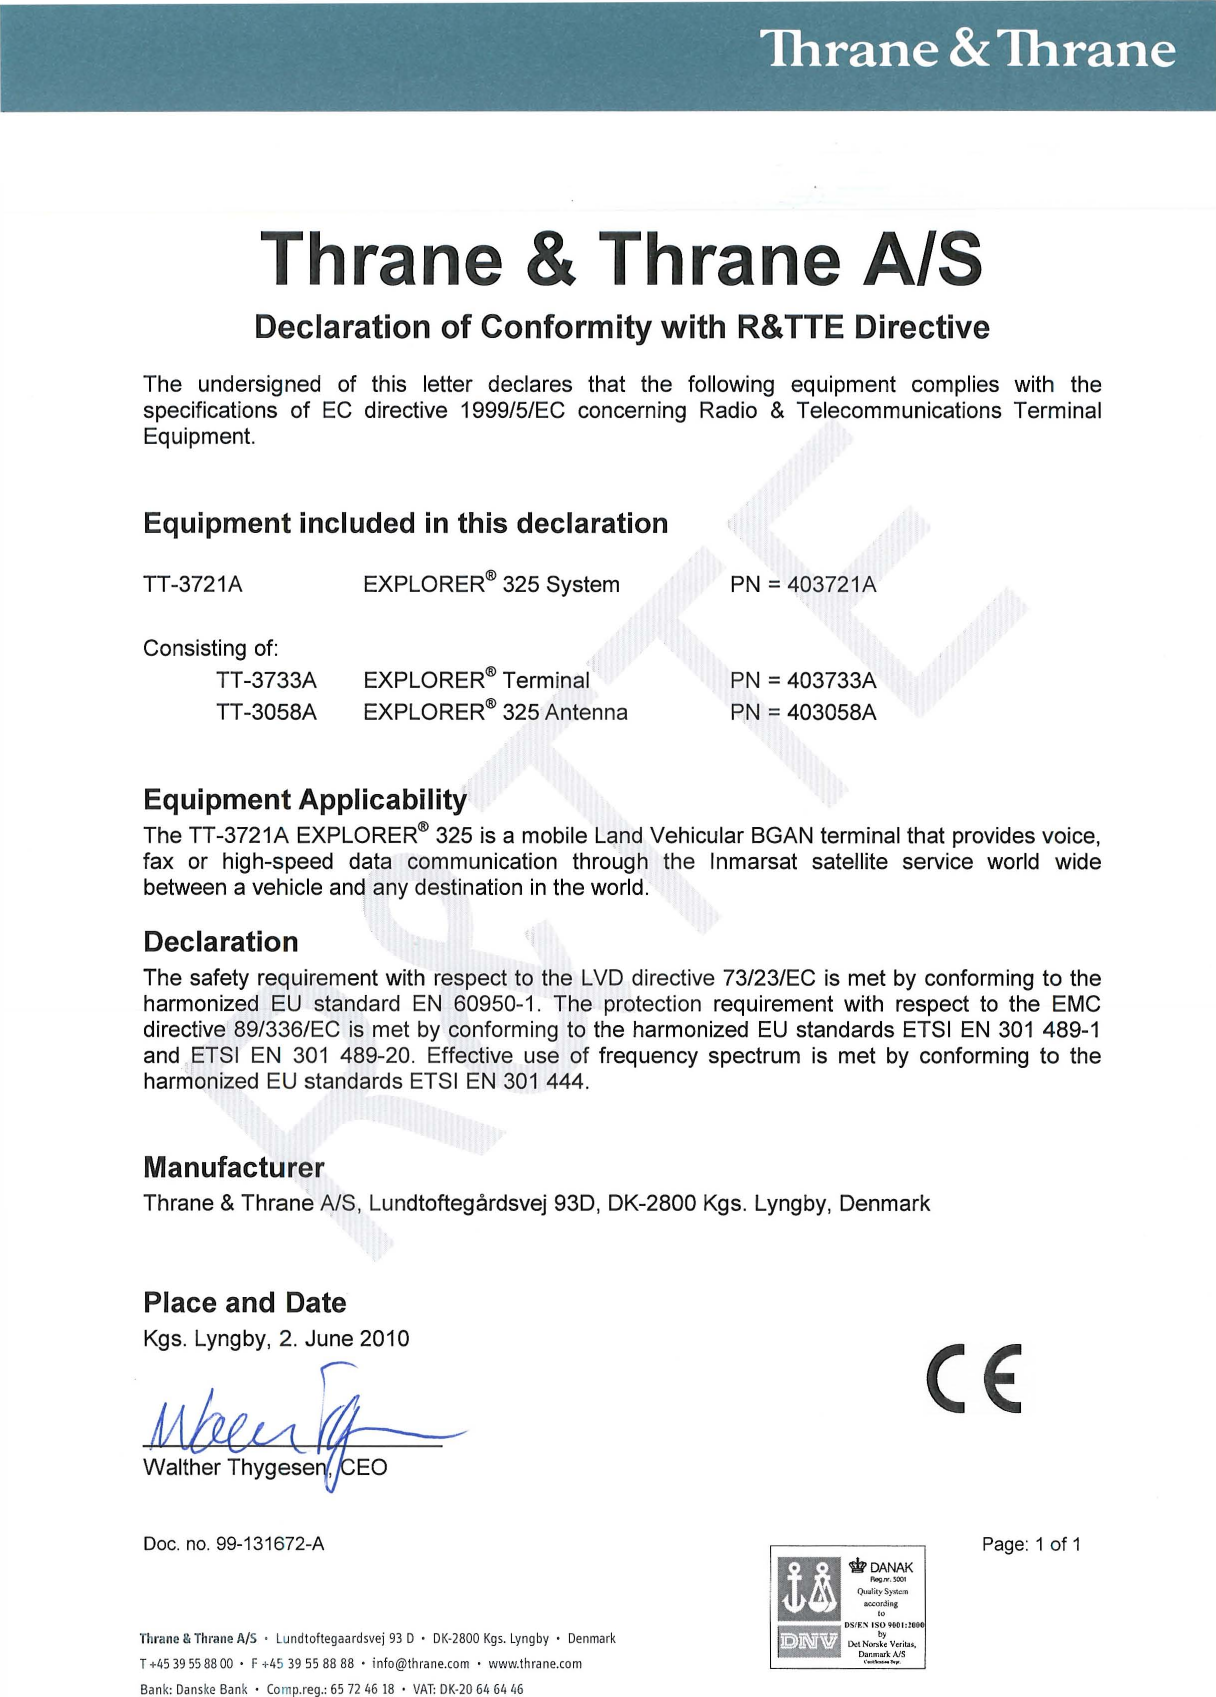 Thrane &amp; Thrane Thrane &amp; Thrane A/S Declaration of Conformity with R&amp; TTE Directive The  undersigned  of  this  letter  declares  that  the  following  equipment  complies  with  the specifications of EC directive  1999/5/EC  concerning  Radio  &amp;  Telecommunications  Terminal Equipment. Equipment included in this declaration TT-3721A Consisting of: TT-3733A TT-3058A EXPLORER® 325 System EXPLORER® Terminal EXPLORER® 325 Antenna Equipment Applicability PN = 403721A PN = 403733A PN = 403058A The TT-3721A EXPLORER® 325 is a mobile Land Vehicular BGAN terminal that provides voice, fax  or  high-speed  data  communication  through  the  Inmarsat  satellite  service  world  wide between a vehicle and any destination in the world. Declaration The safety requirement with  respect to the LVD directive 73/23/EC is met by conforming to the harmonized EU standard EN 60950-1 .  The  protection  requirement  with  respect to the  EMC directive 89/336/EC is met by conforming  to  the harmonized EU standards ETSI EN 301 489-1 and  ETSI EN 301 489-20.  Effective  use of frequency  spectrum  is  met by conforming  to  the harmonized EU standards ETSI EN 301 444. Manufacturer Thrane &amp; Thrane A/S, Lundtoftegardsvej 93D, DK-2800 Kgs.  Lyngby,  Denmark Place and  Date Kgs.  Lyngby,  2. June 2010 r Doc. no. 99-131672-A Thrane &amp; Thrane A/S • Lundtoftegaardsvej 93 D •  DK-2800 Kgs. Lyngby • Denmark T +4539558800  •  F +45 39 55 88 88 • i nfo@thrane.com  • www.thrane.com Bank: Danske Bank  •  Comp.reg.: 65 72 46 18 • VAT: DK-20 64  64 46 C€ Page: 1 of 1 